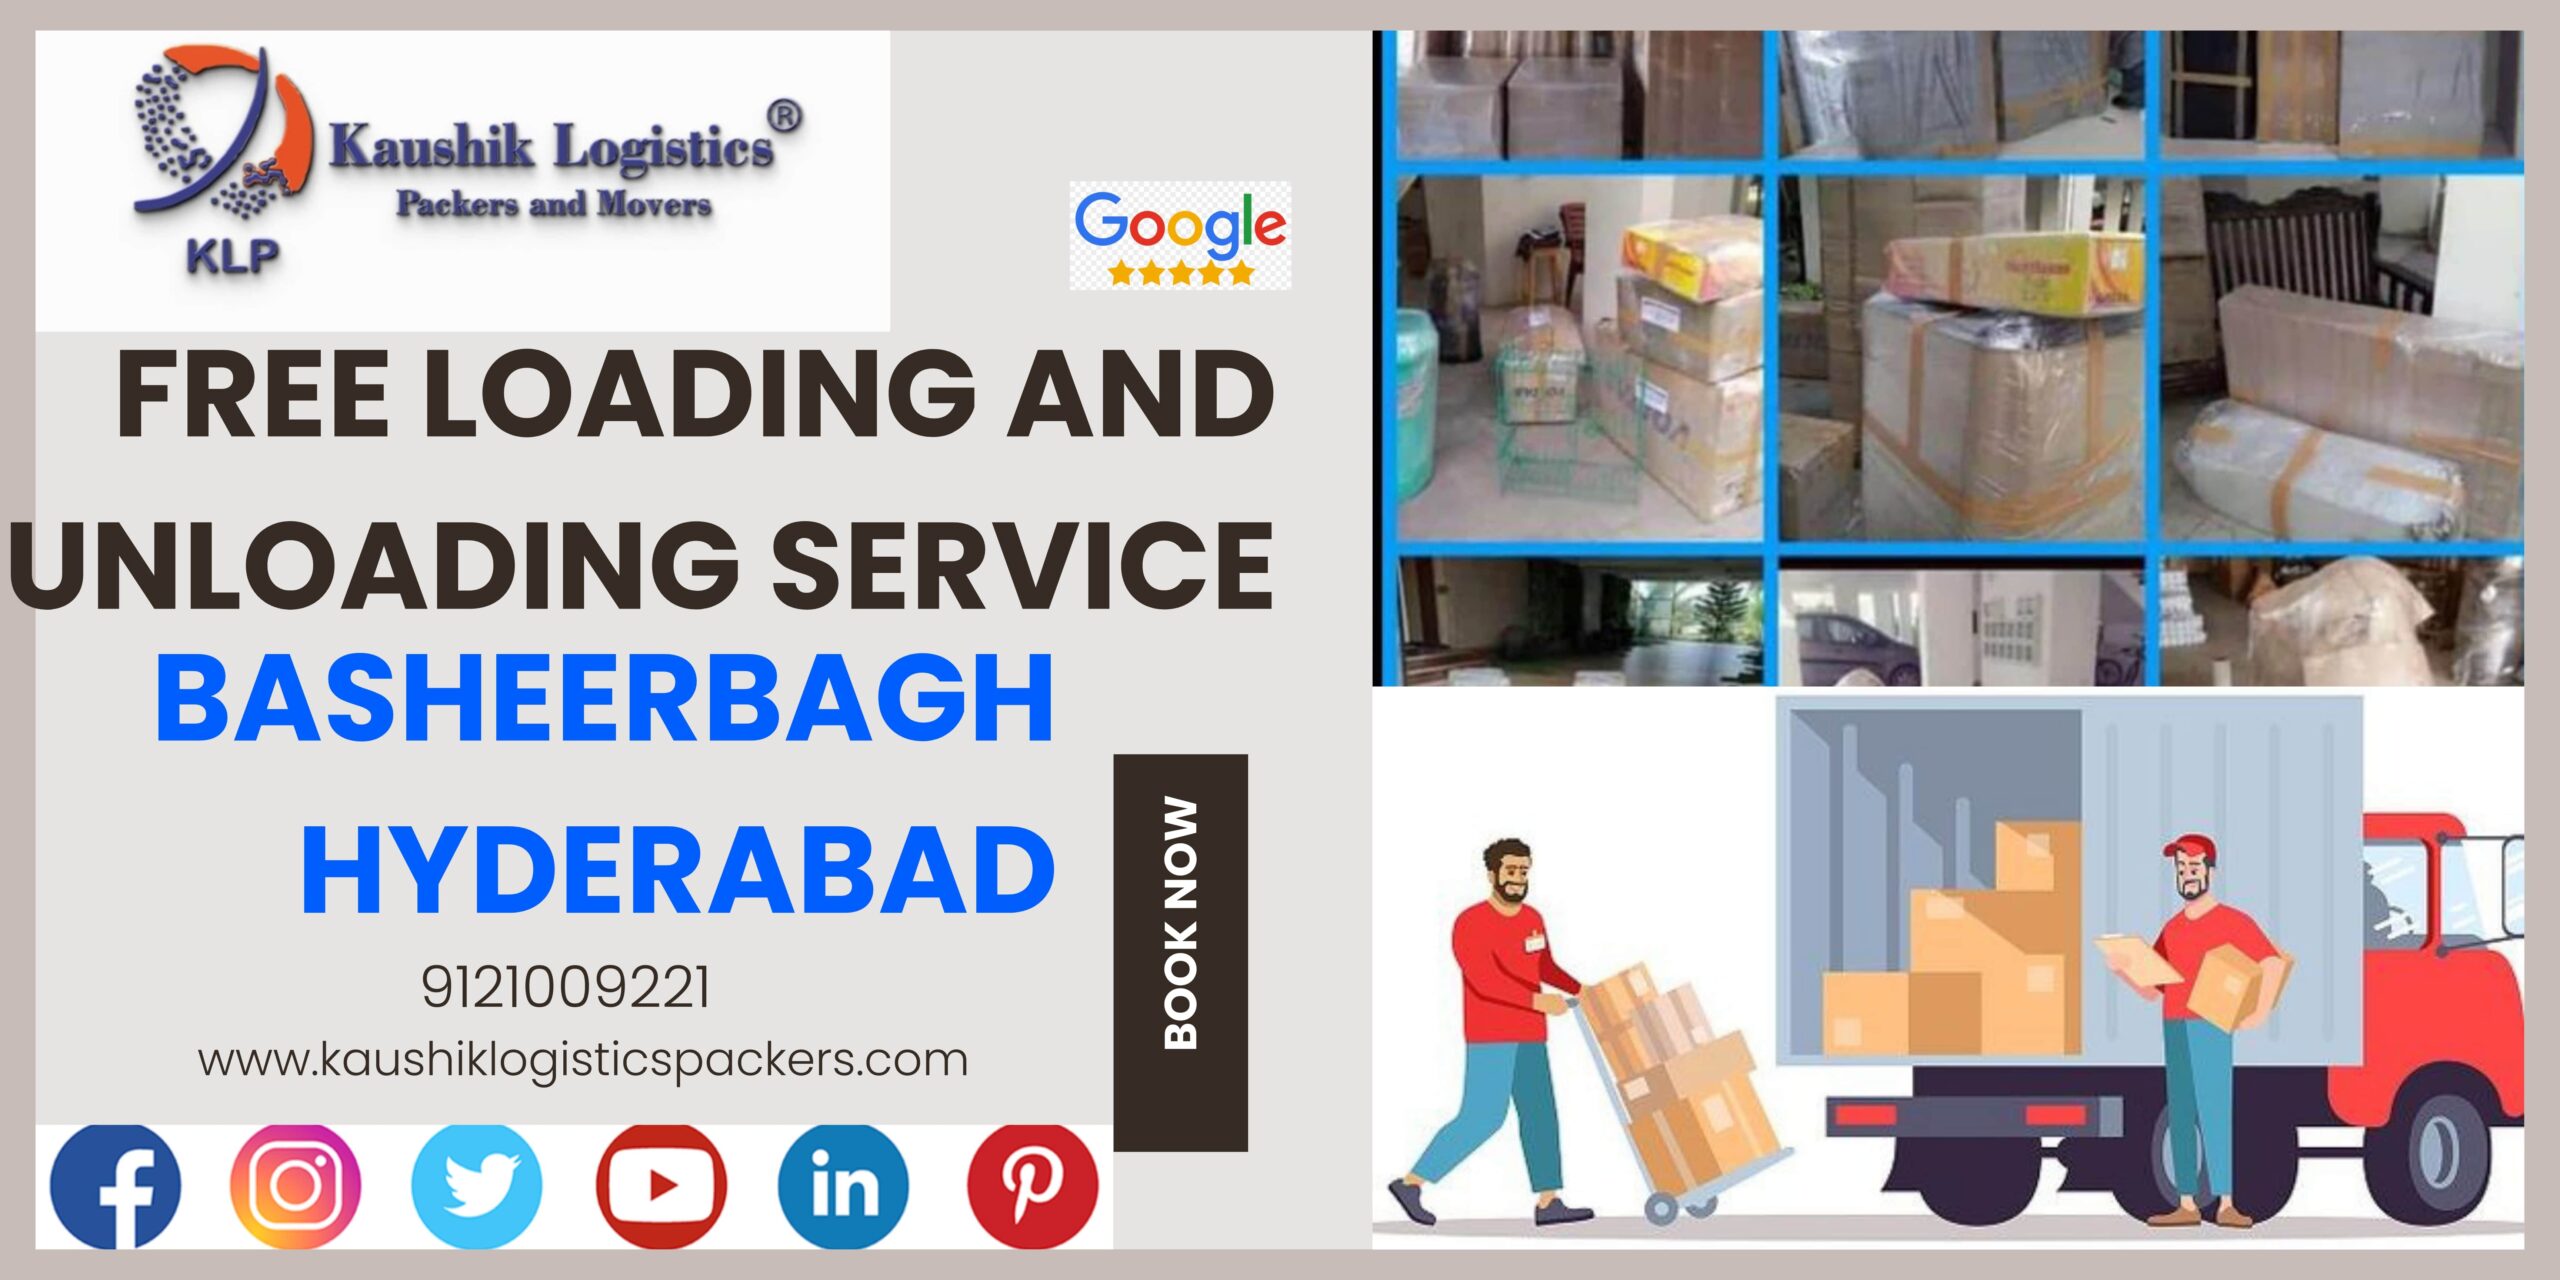 Packers and Movers In Basheerbagh